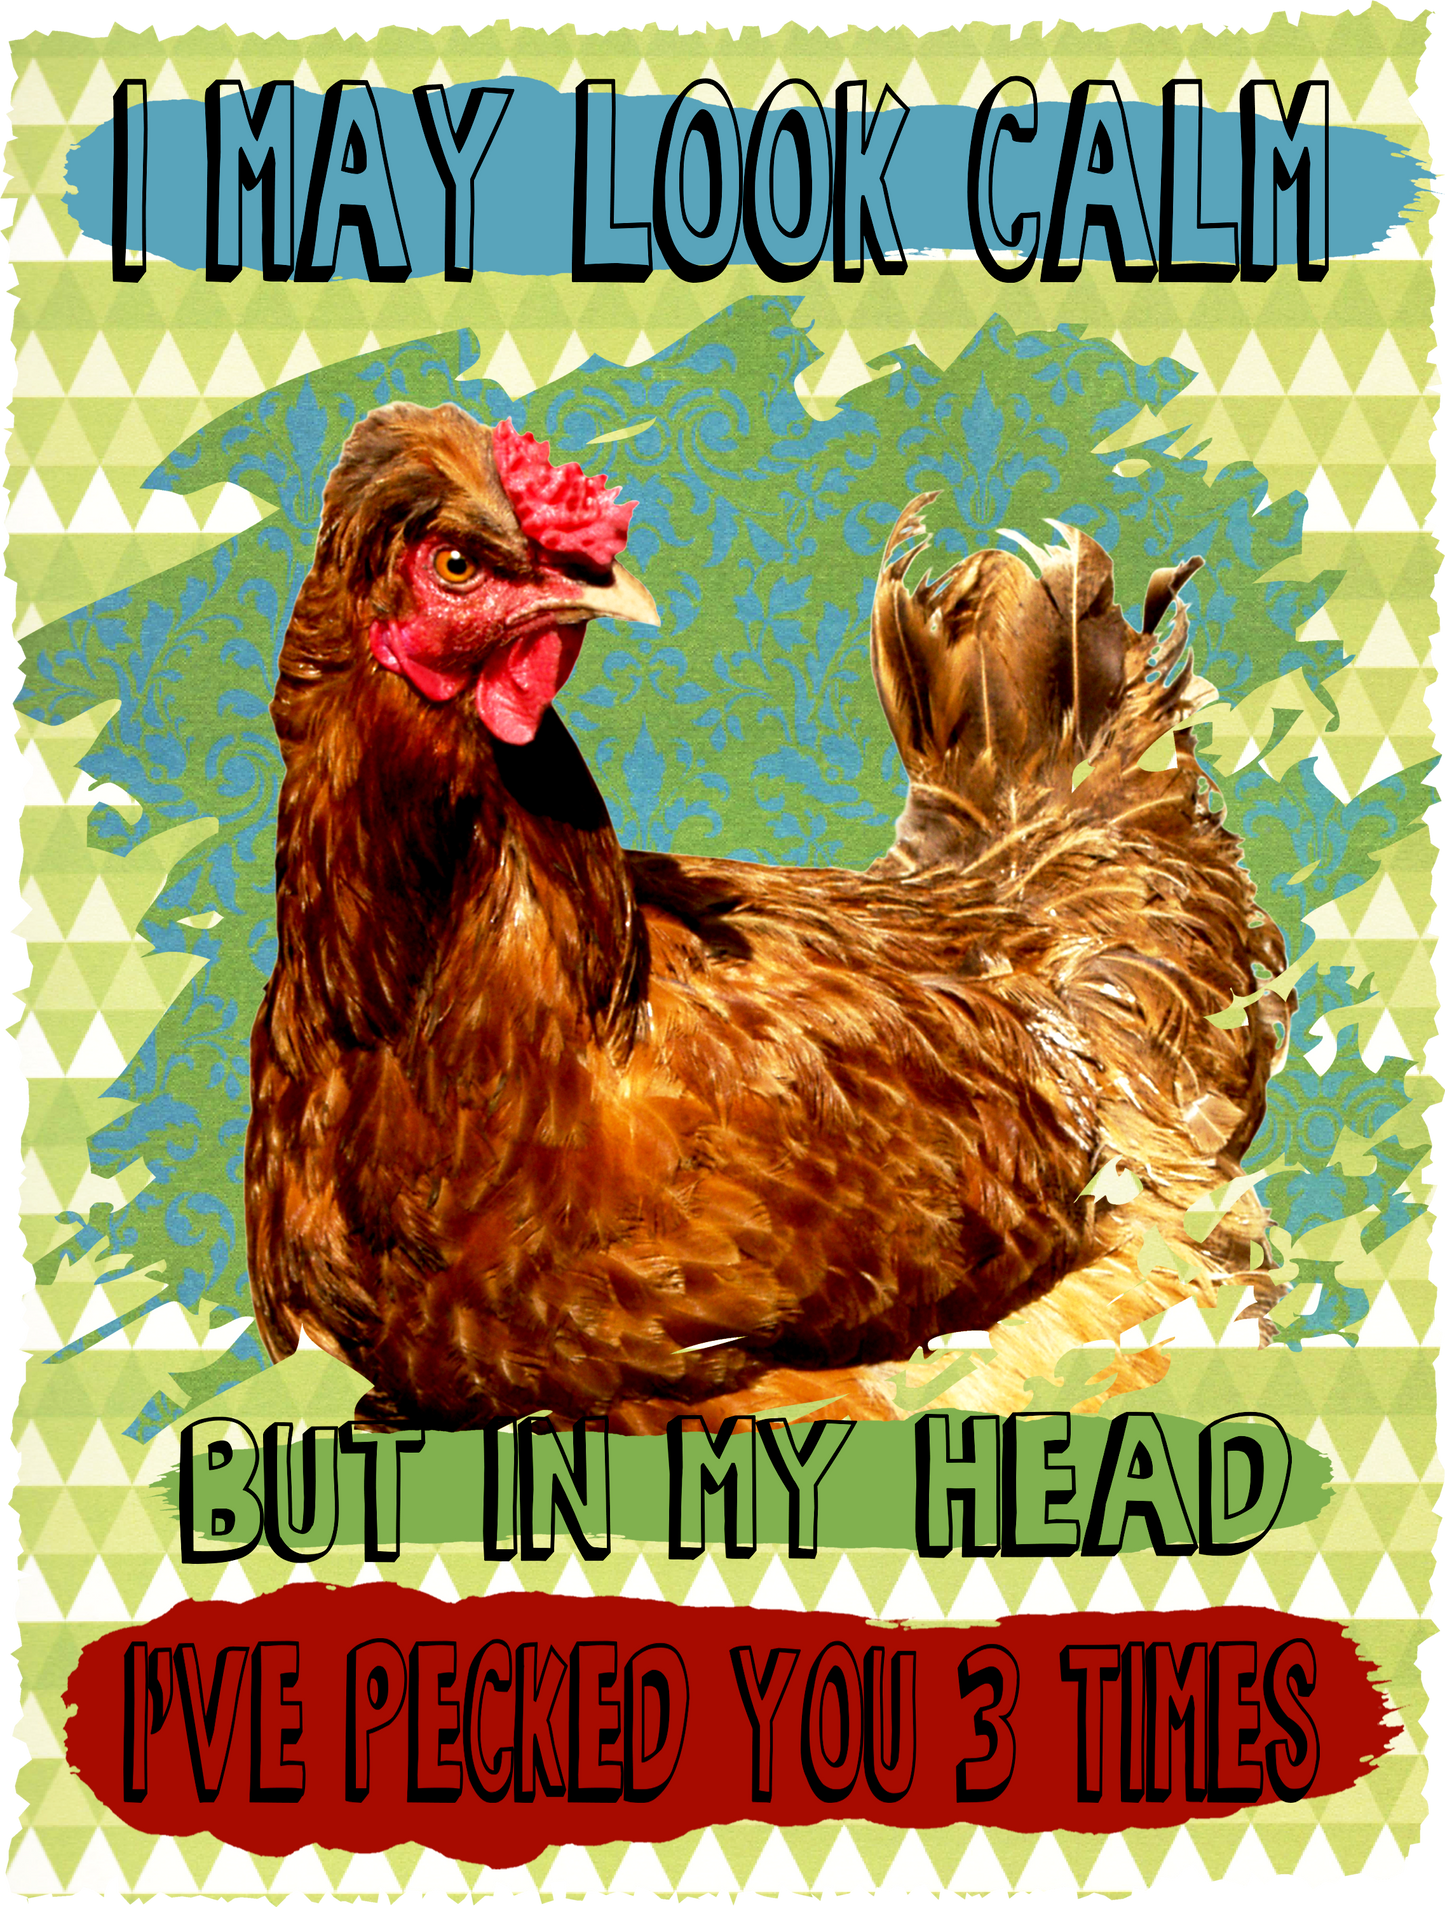 I may look calm but in my head I’ve pecked you 3 times png Digital Download Instand Download